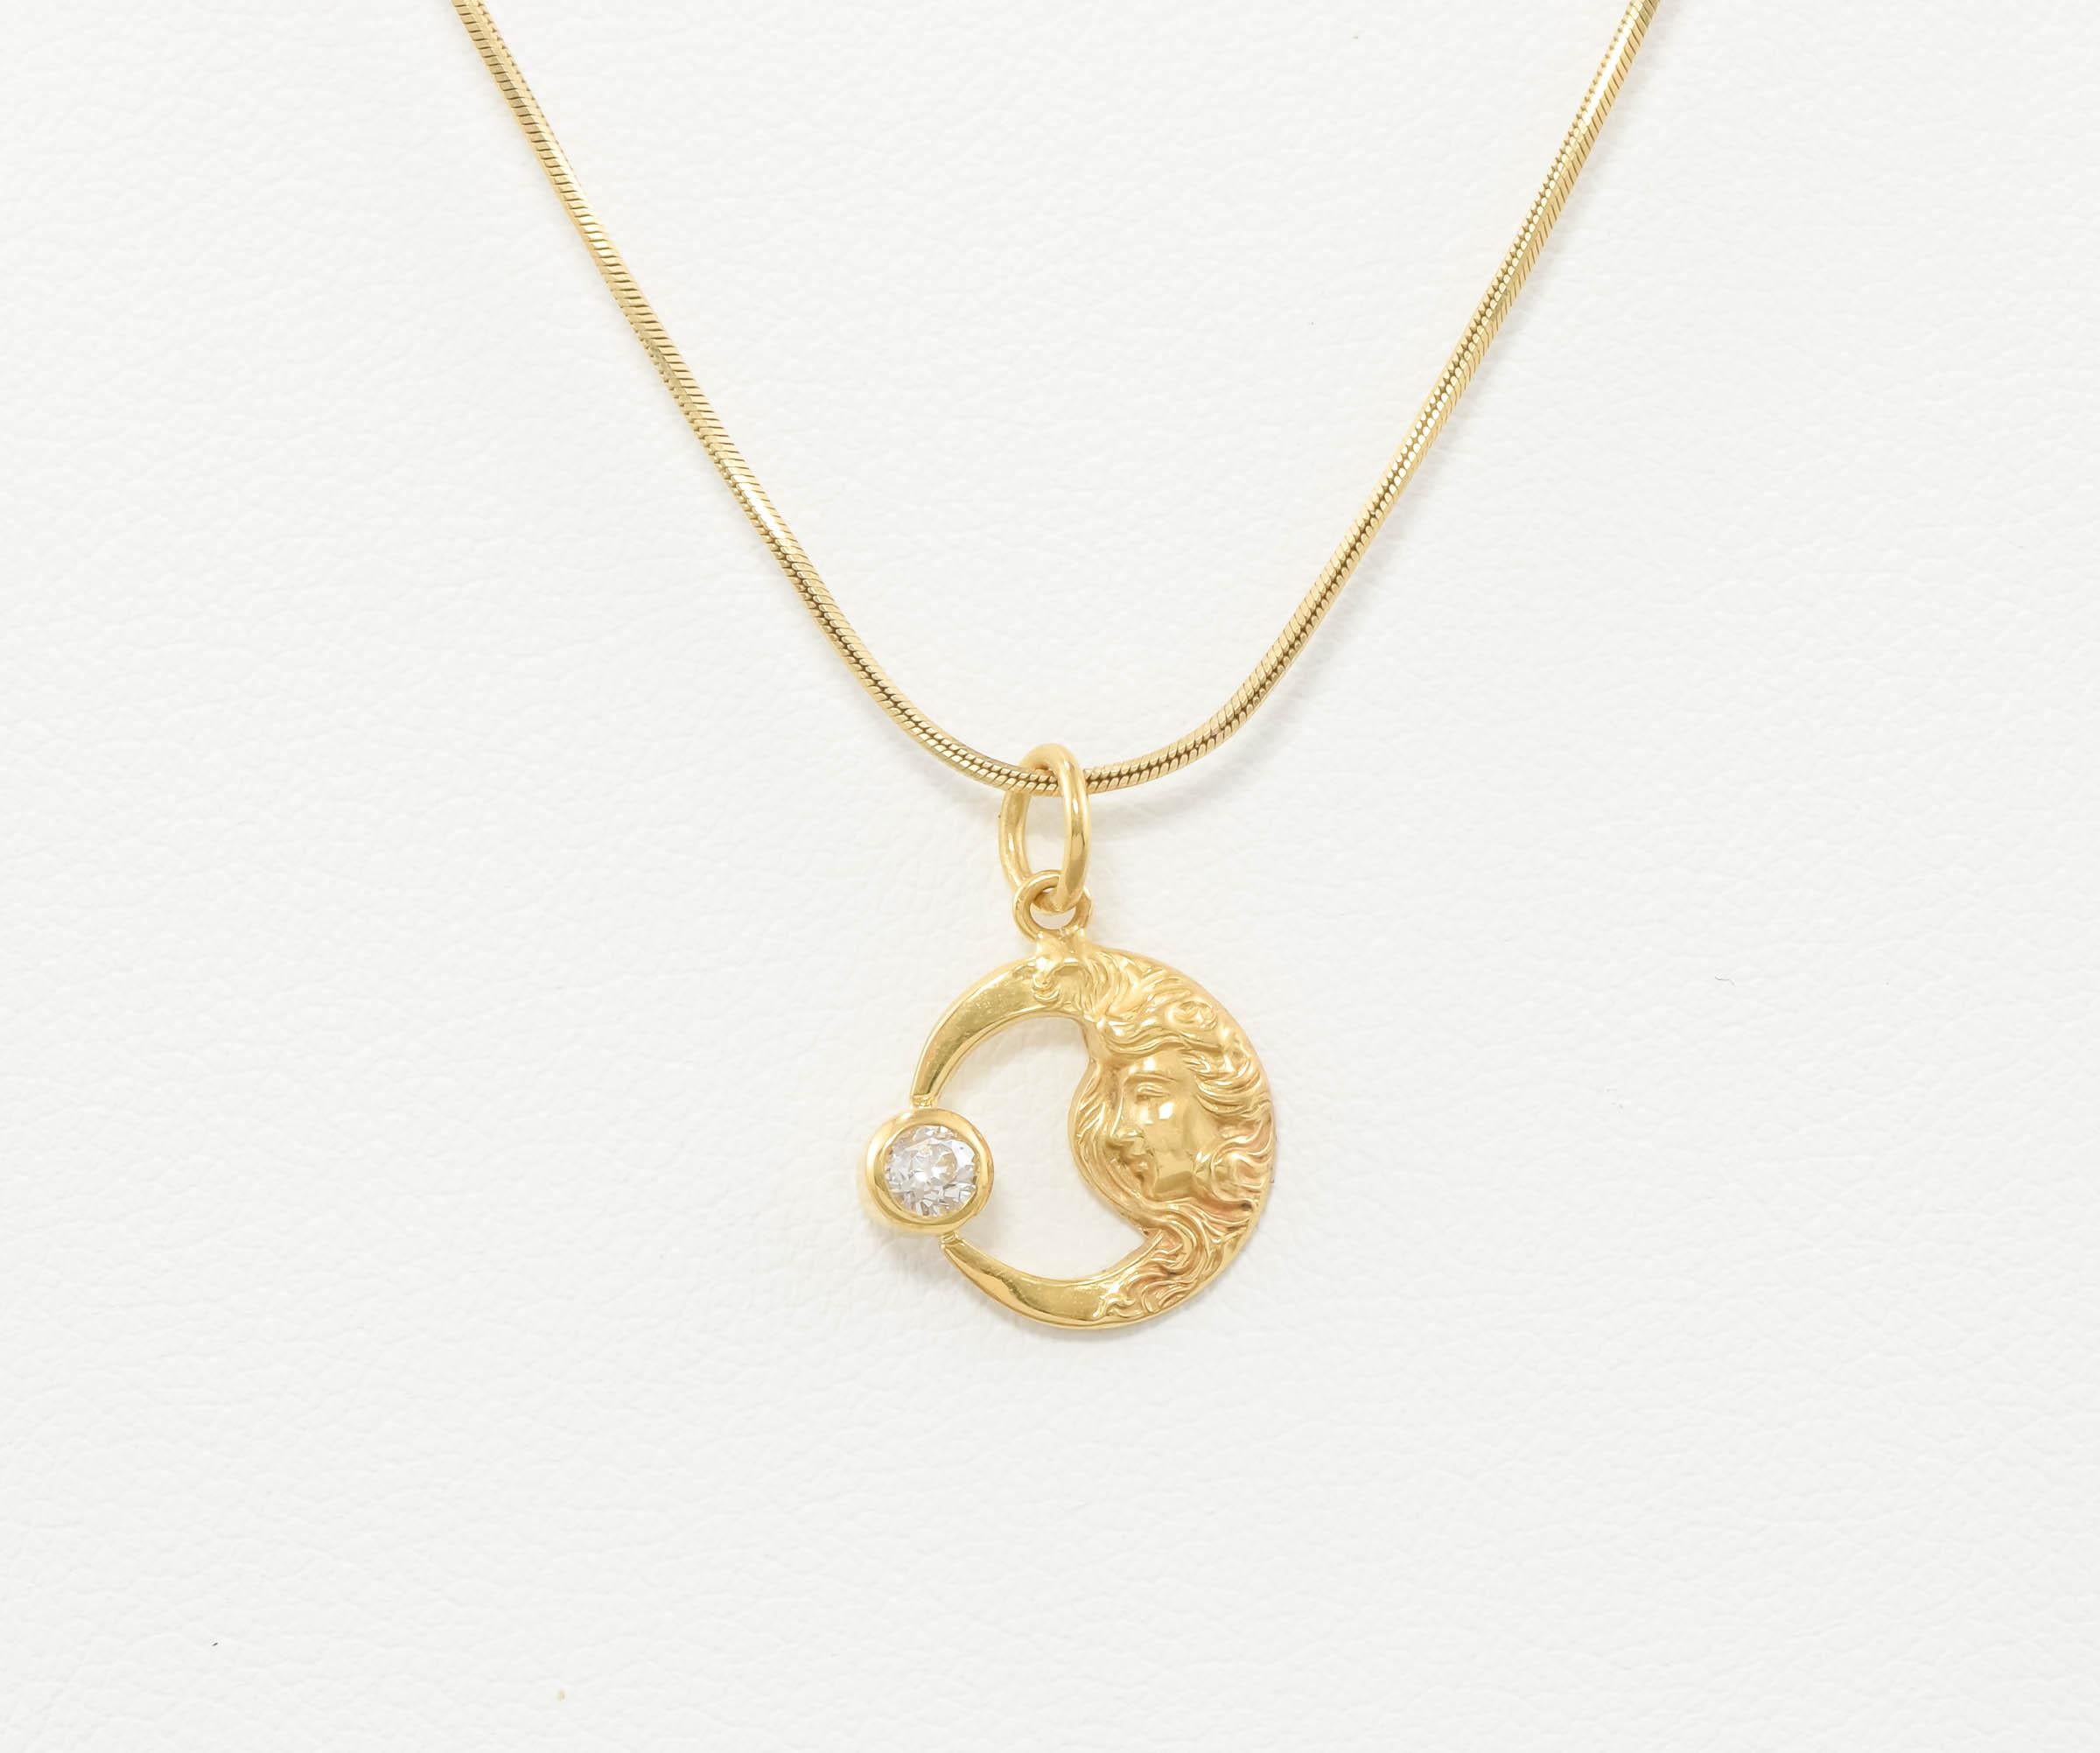 Tiny Gold Celestial Charm Necklace - Art Nouveau 'Lady in the Moon' with Diamond 5